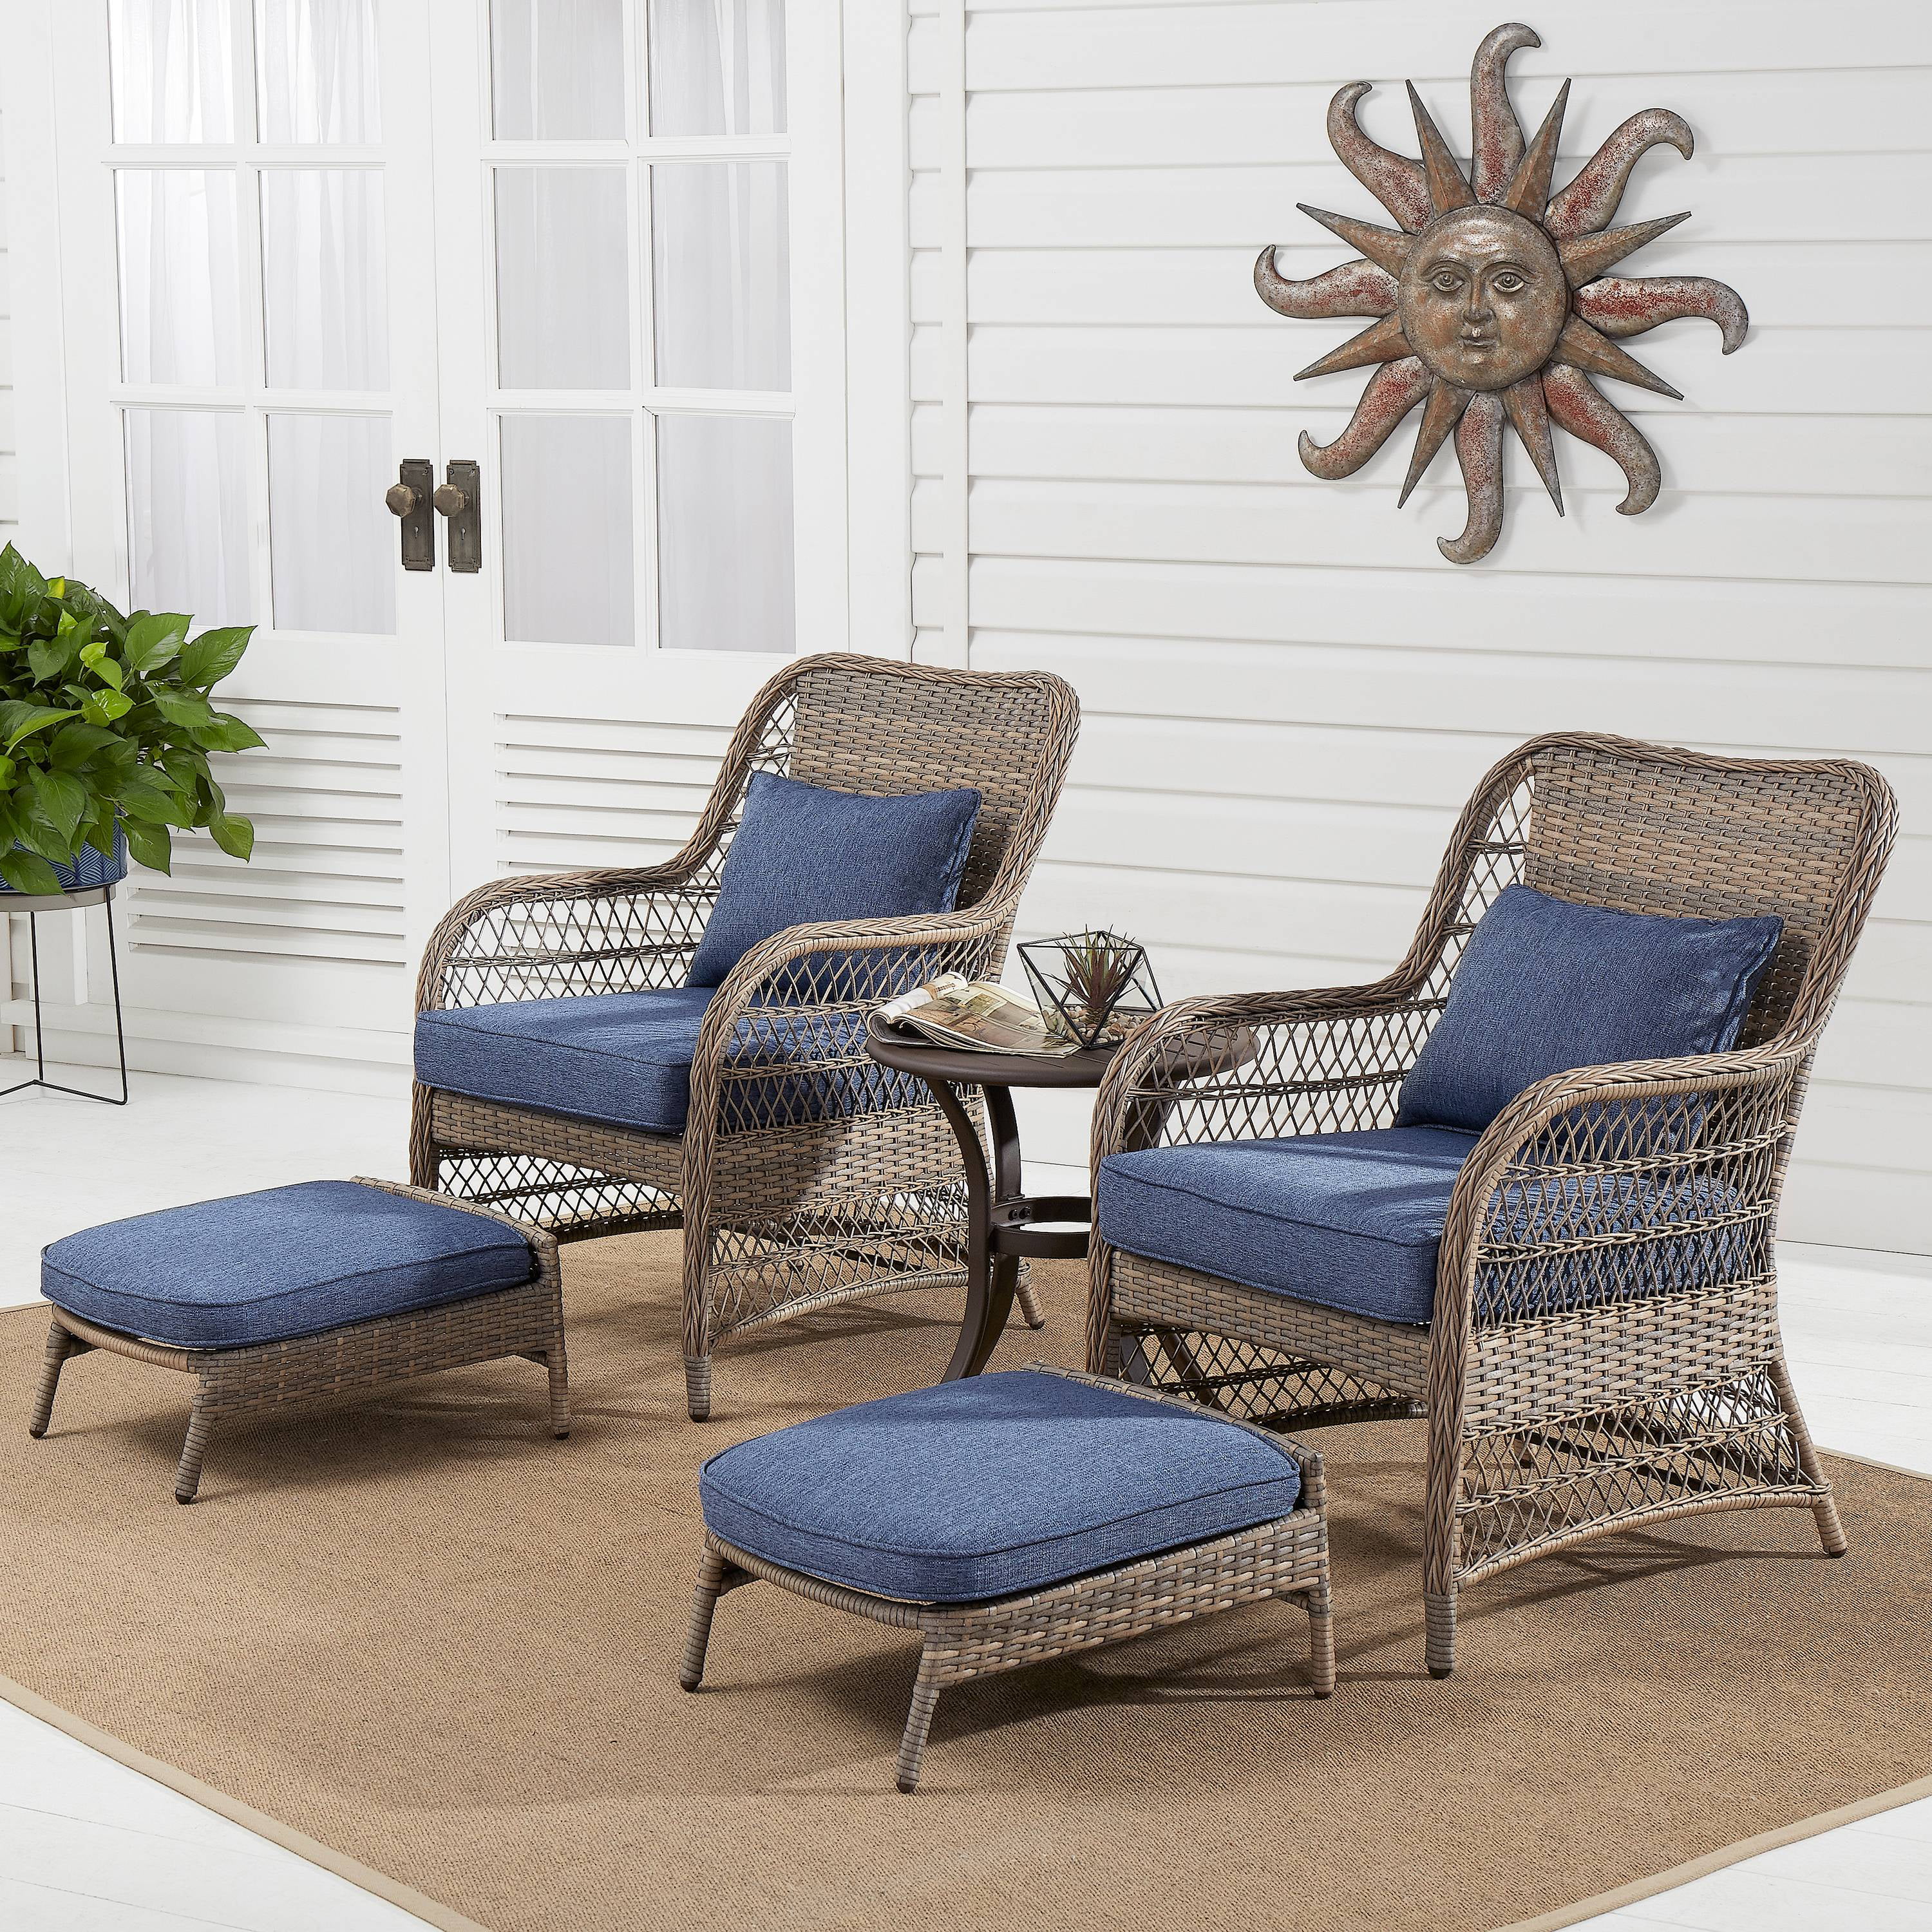 Better Homes Gardens Auburn 5 Piece Wicker Patio Chat Set With